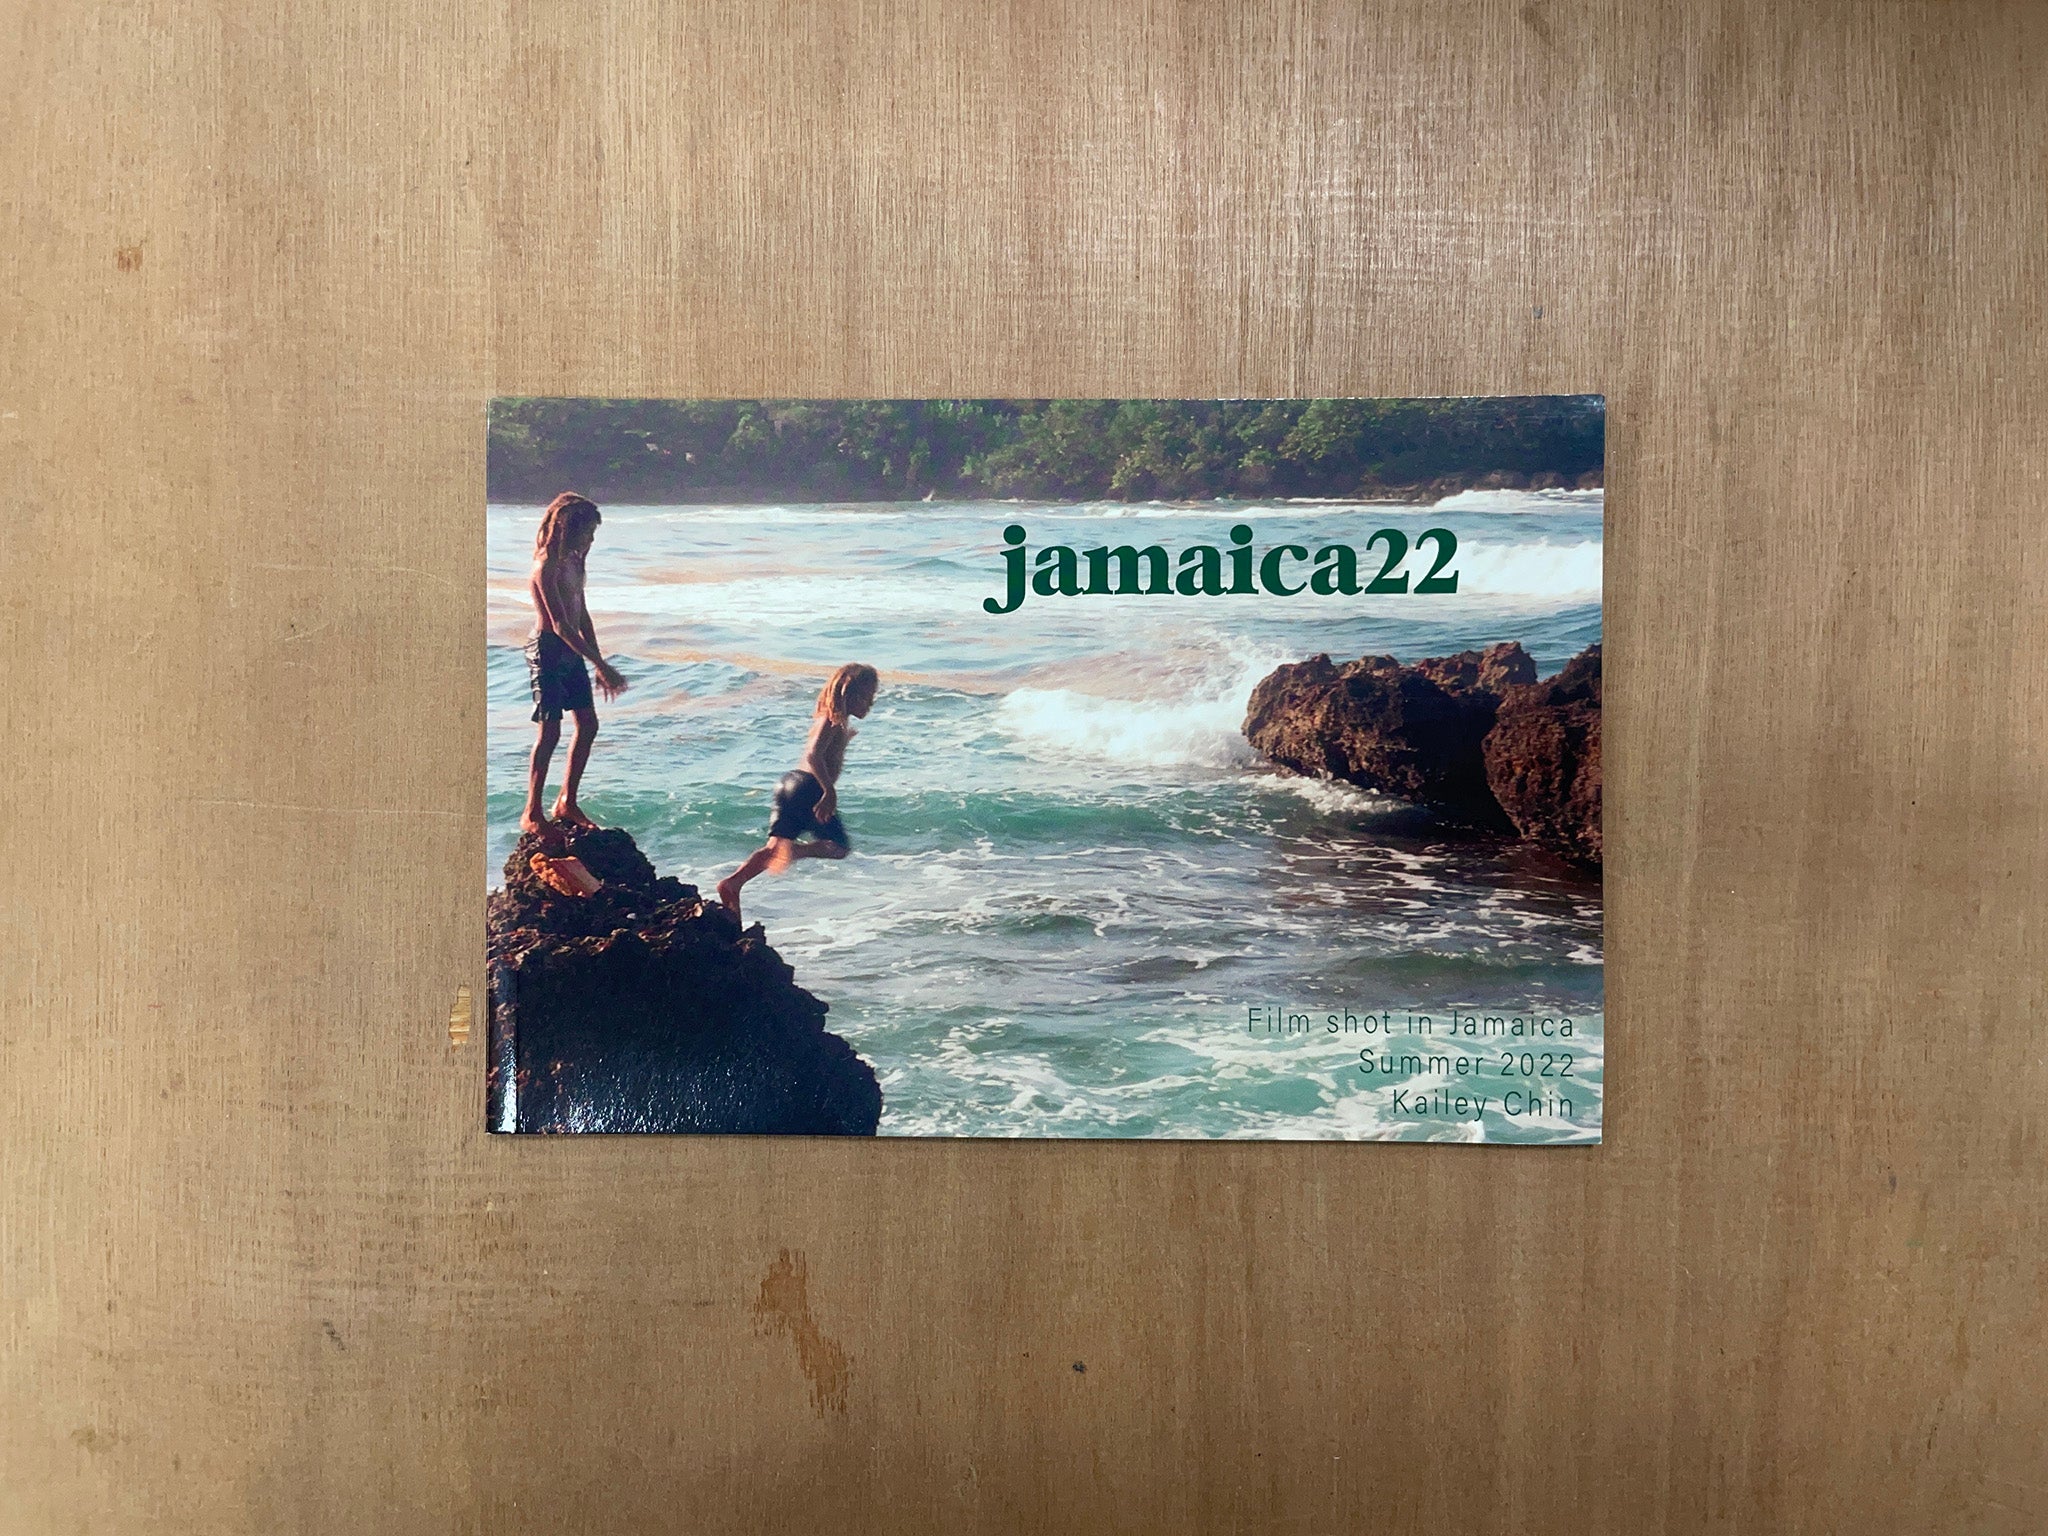 JAMAICA22 by Kailey Chin